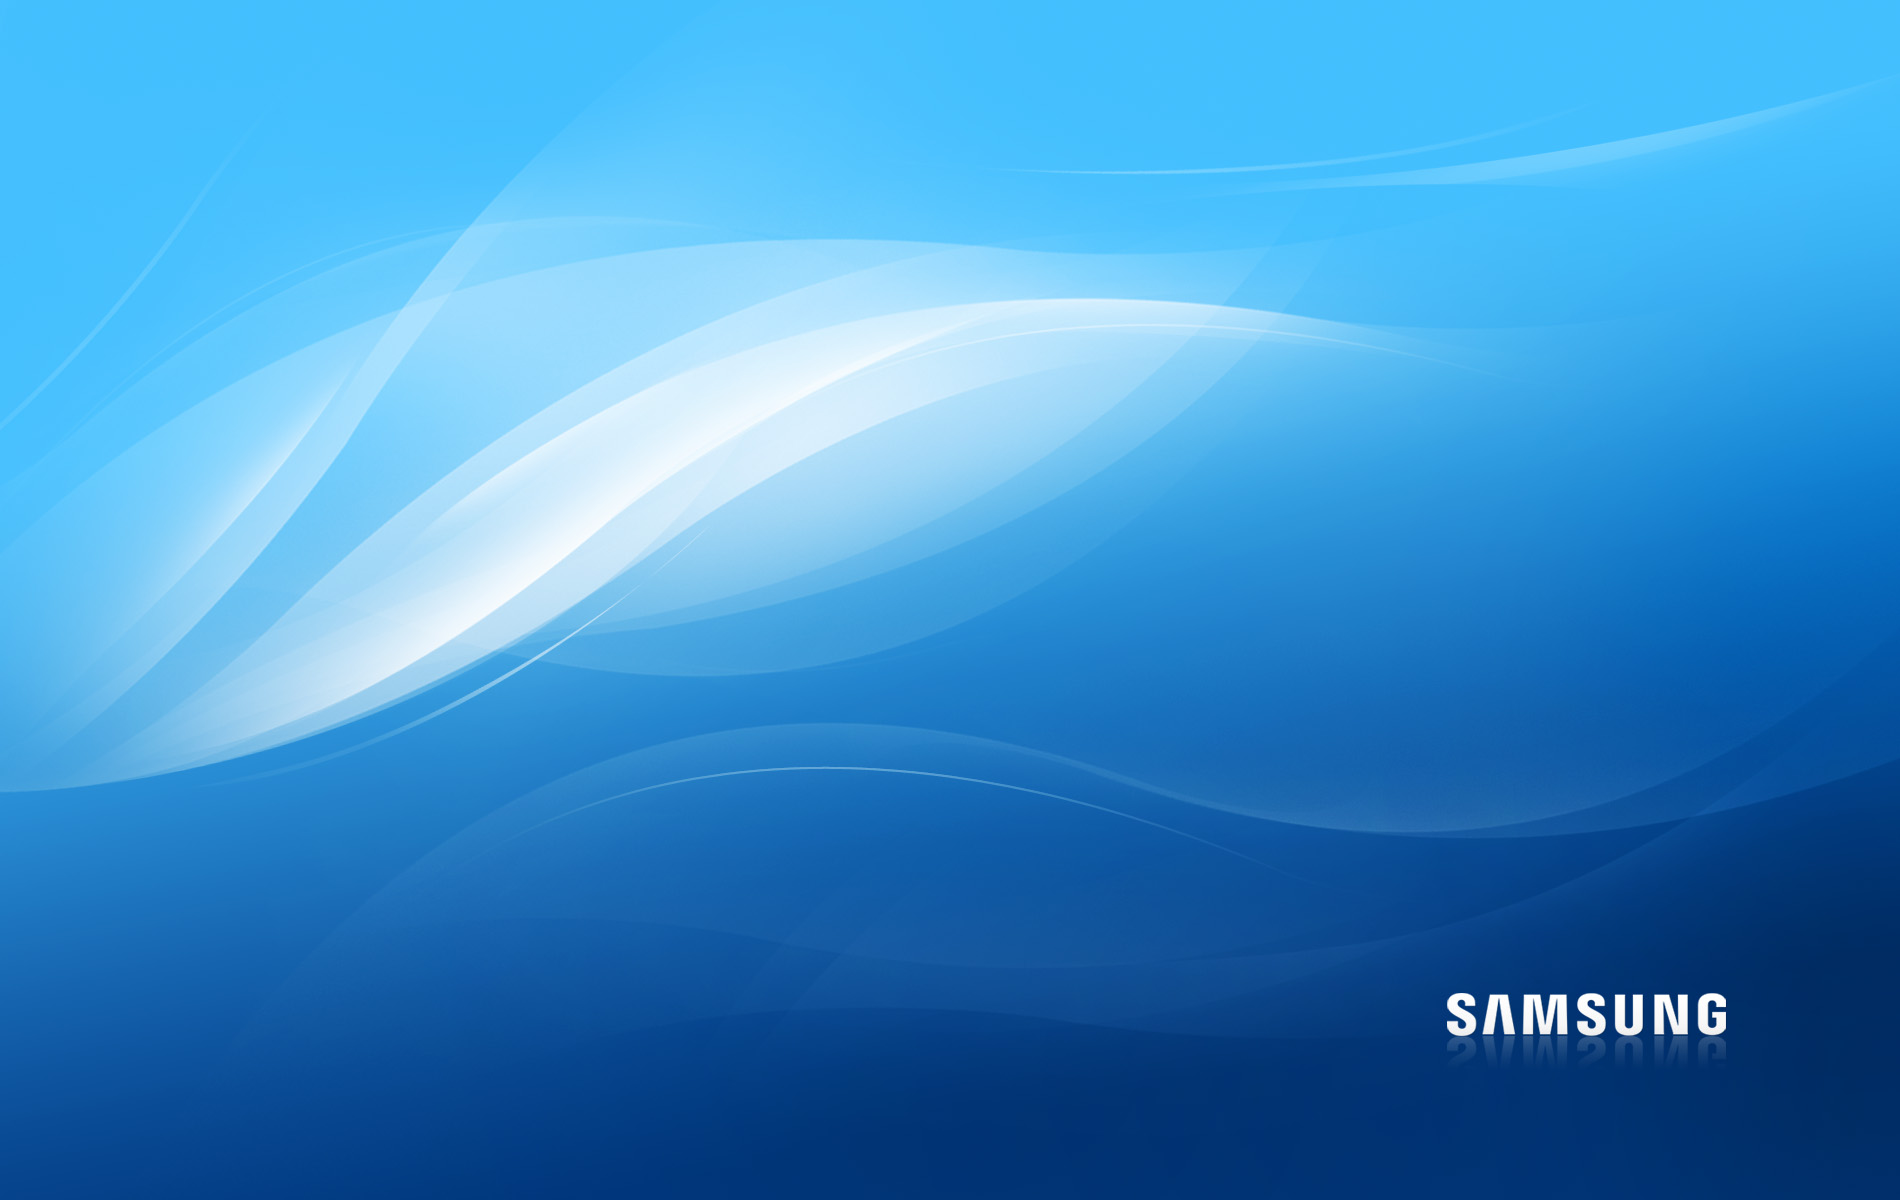 Samsung Wallpaper For Puters On